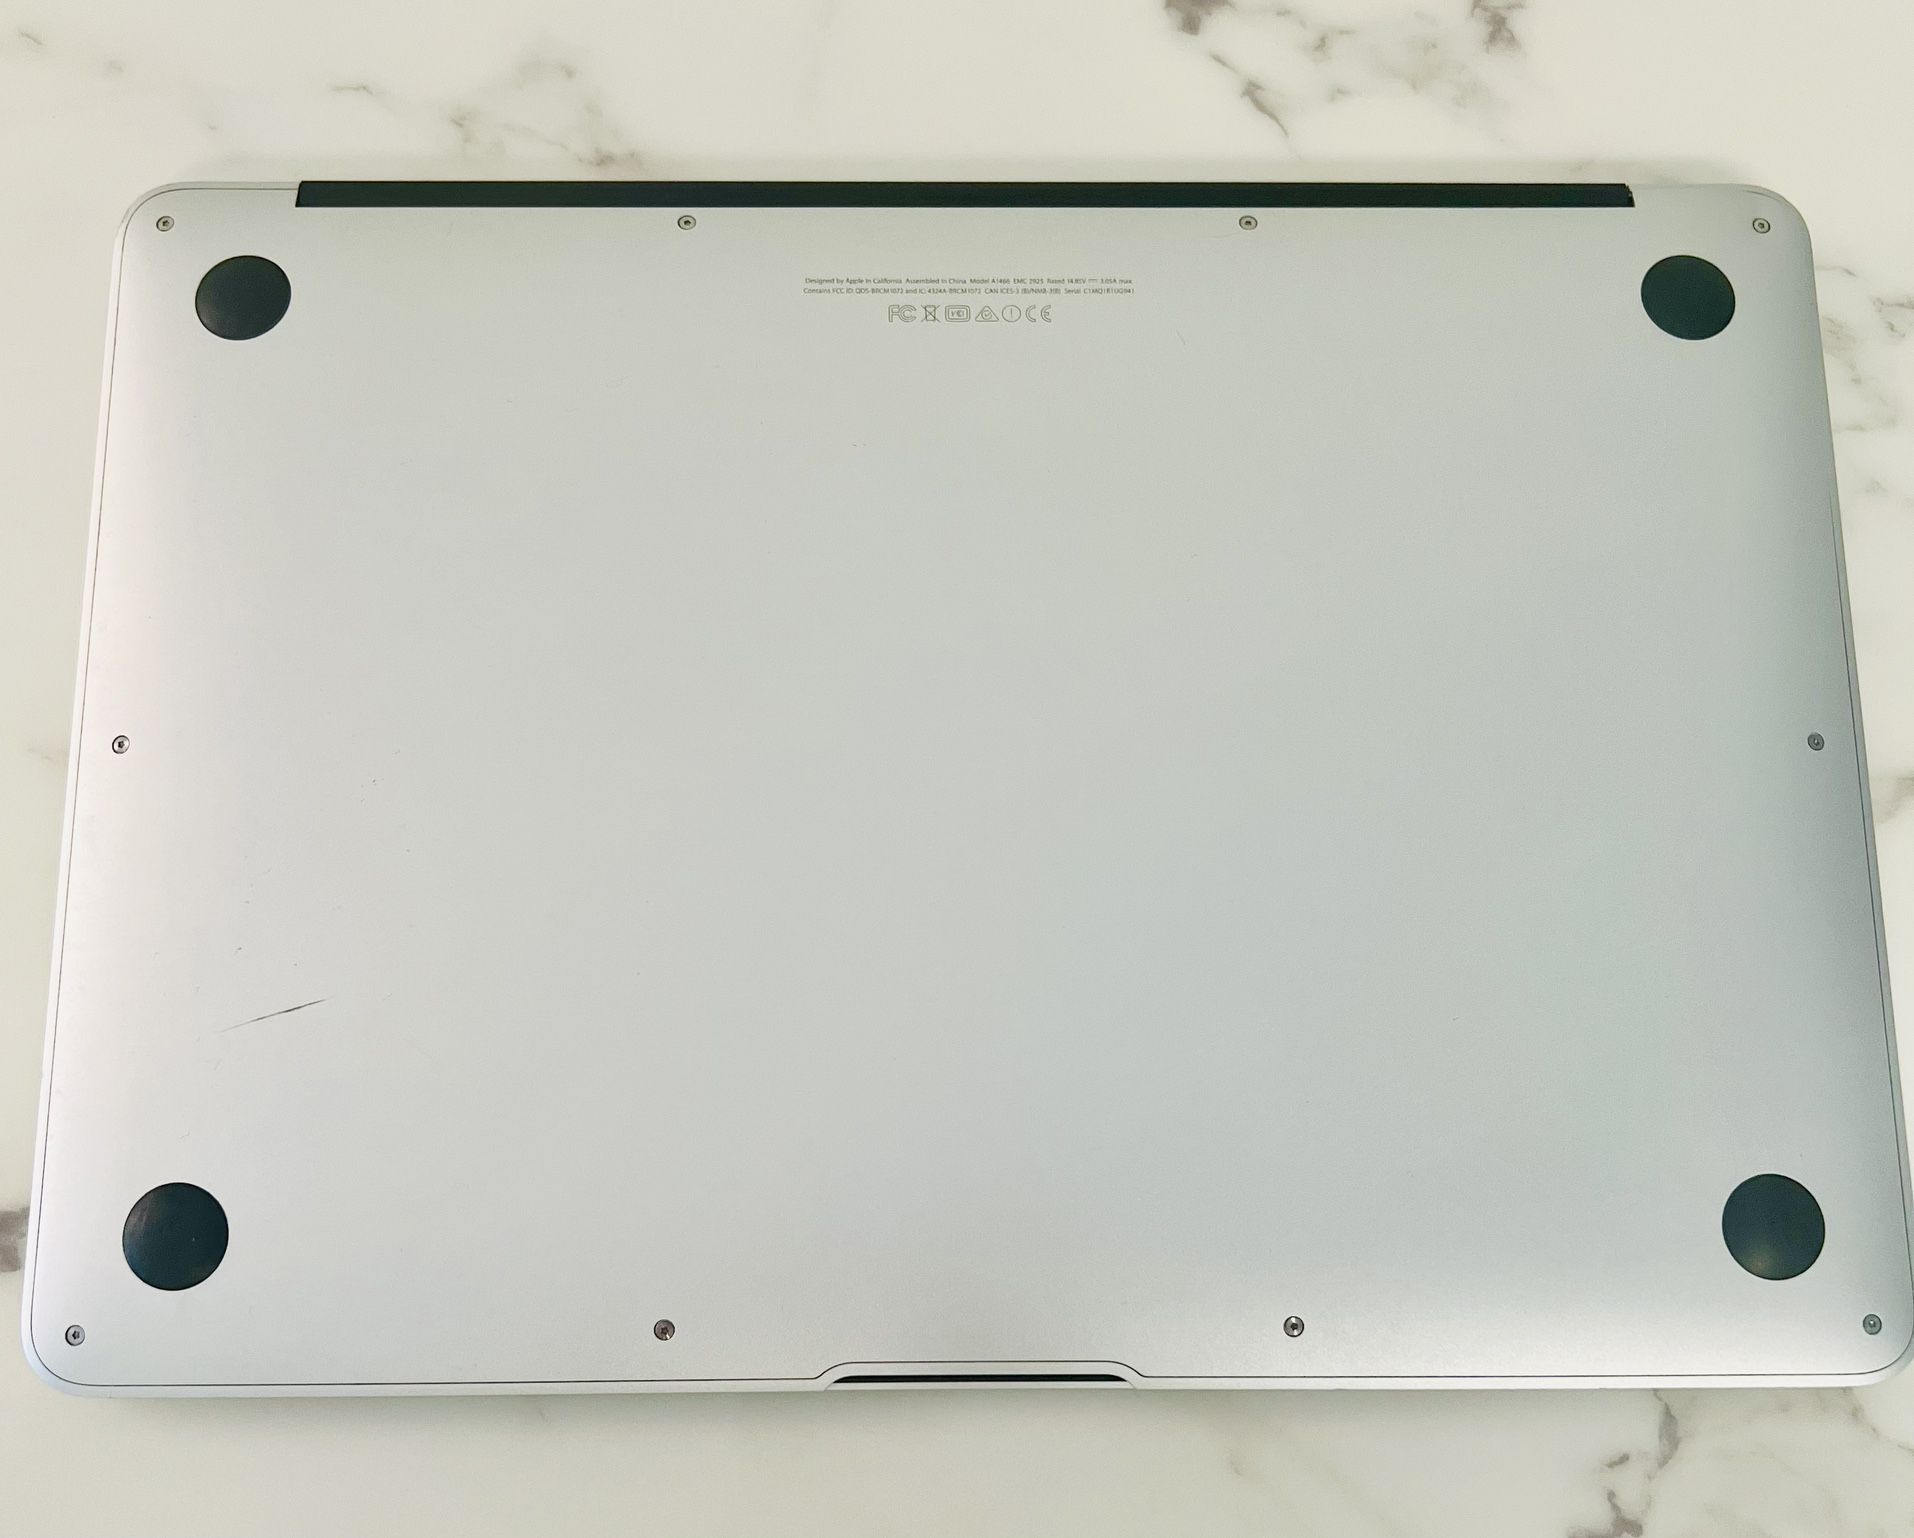 Apple MacBook Air (13-inch, early 2016) Laptop Computer